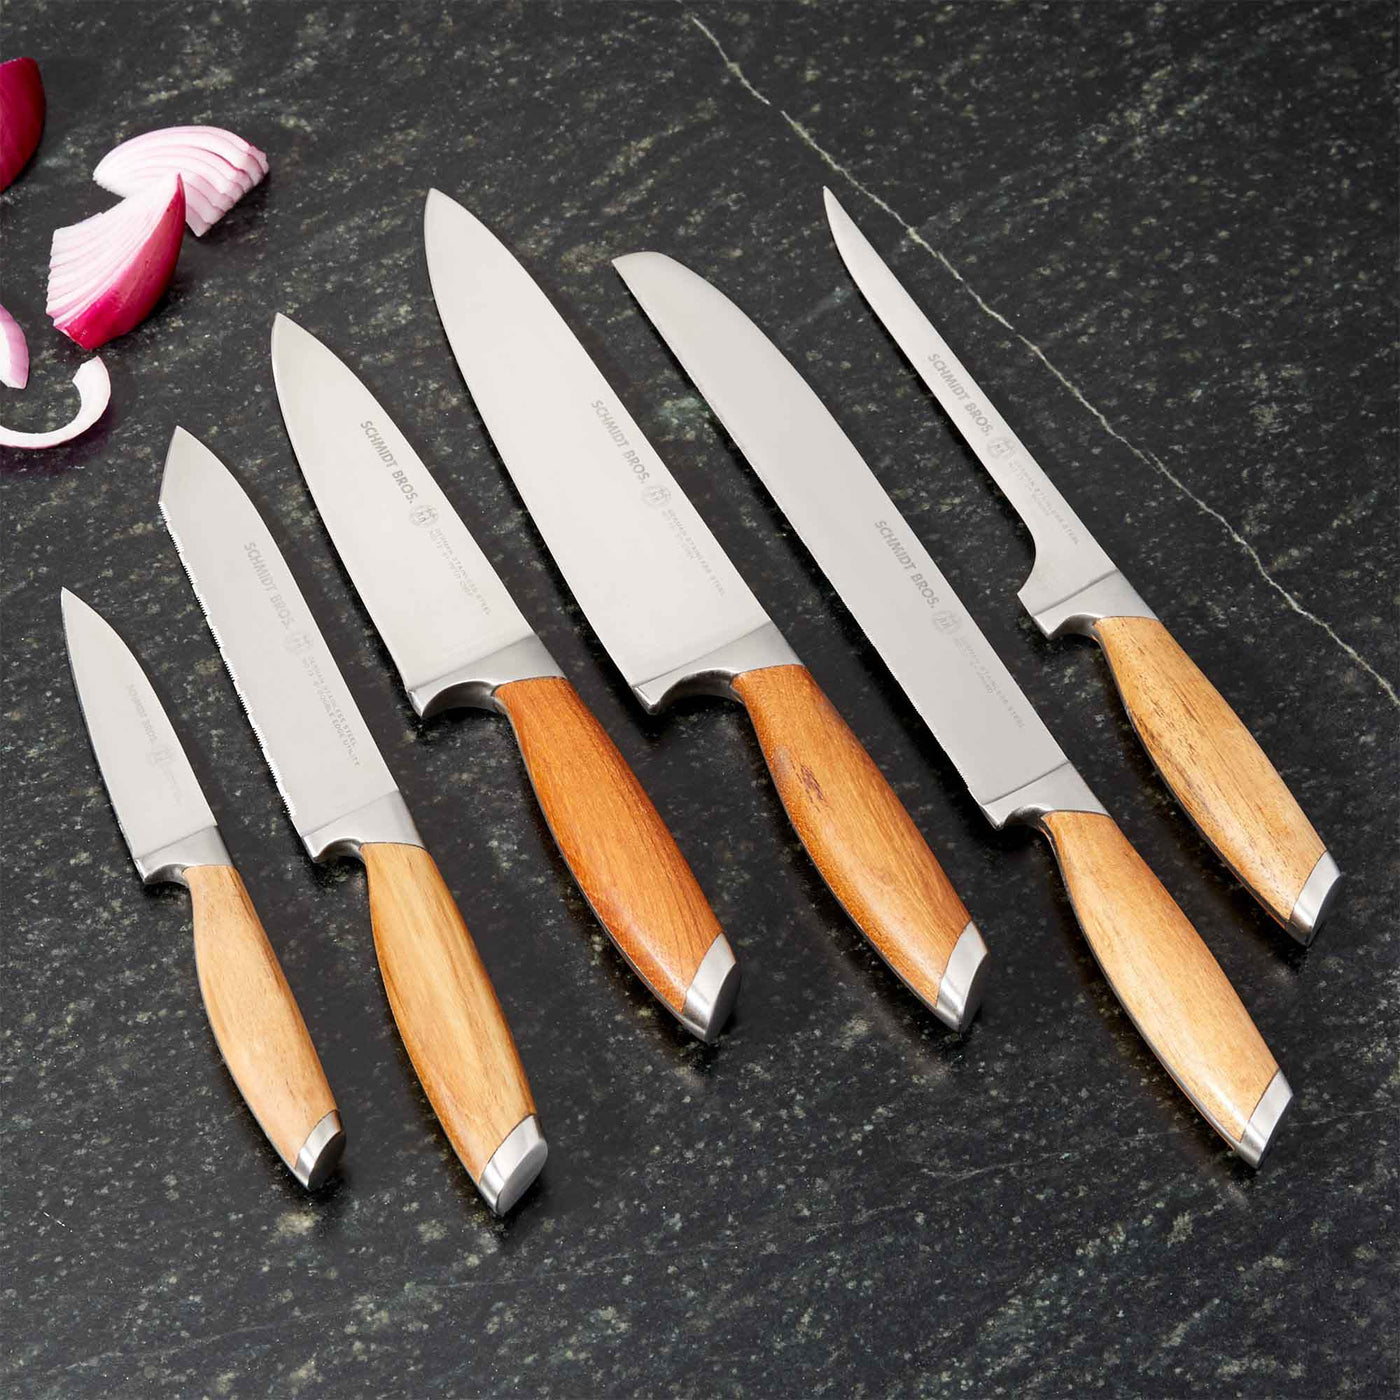 Schmidt Brothers Kitchen Cutlery Schmidt Brothers - Bonded Teak, 7-Piece Knife Set, High-Carbon Stainless Steel Cutlery with Acacia and Acrylic Magnetic Knife Block